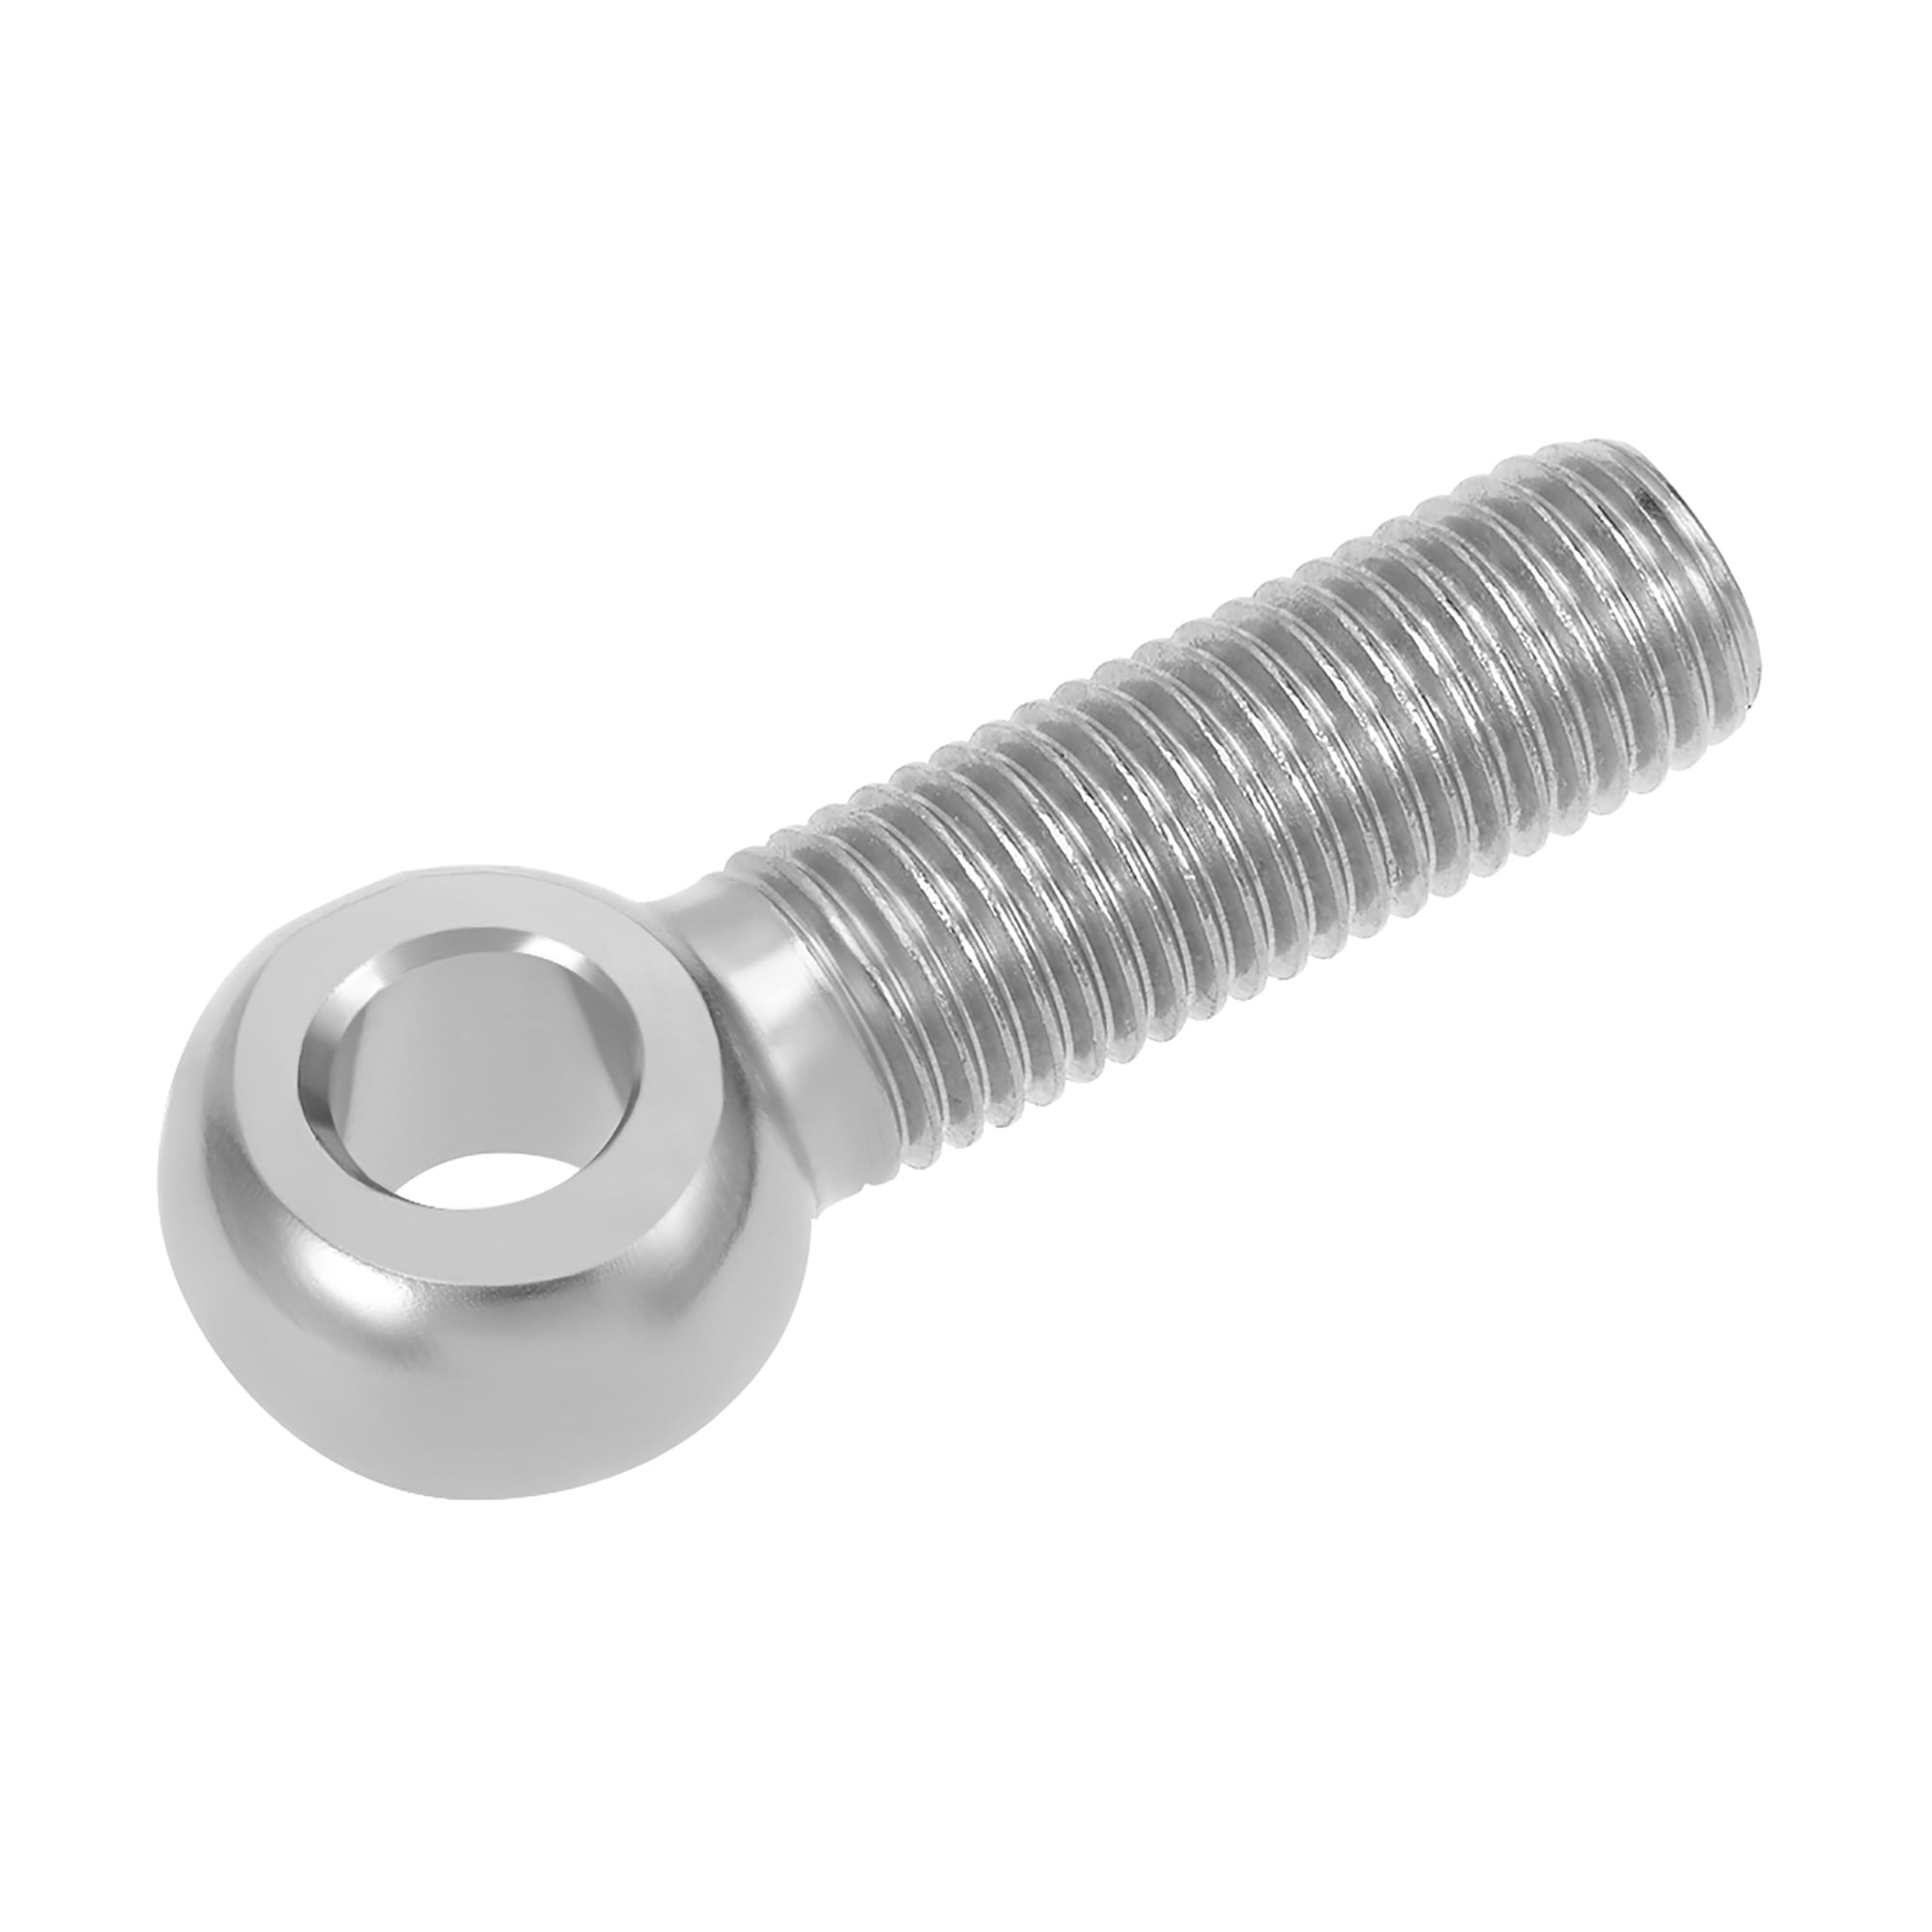 Uxcell M X Mm Stainless Steel Machinery Shoulder Lifting Eye Bolt